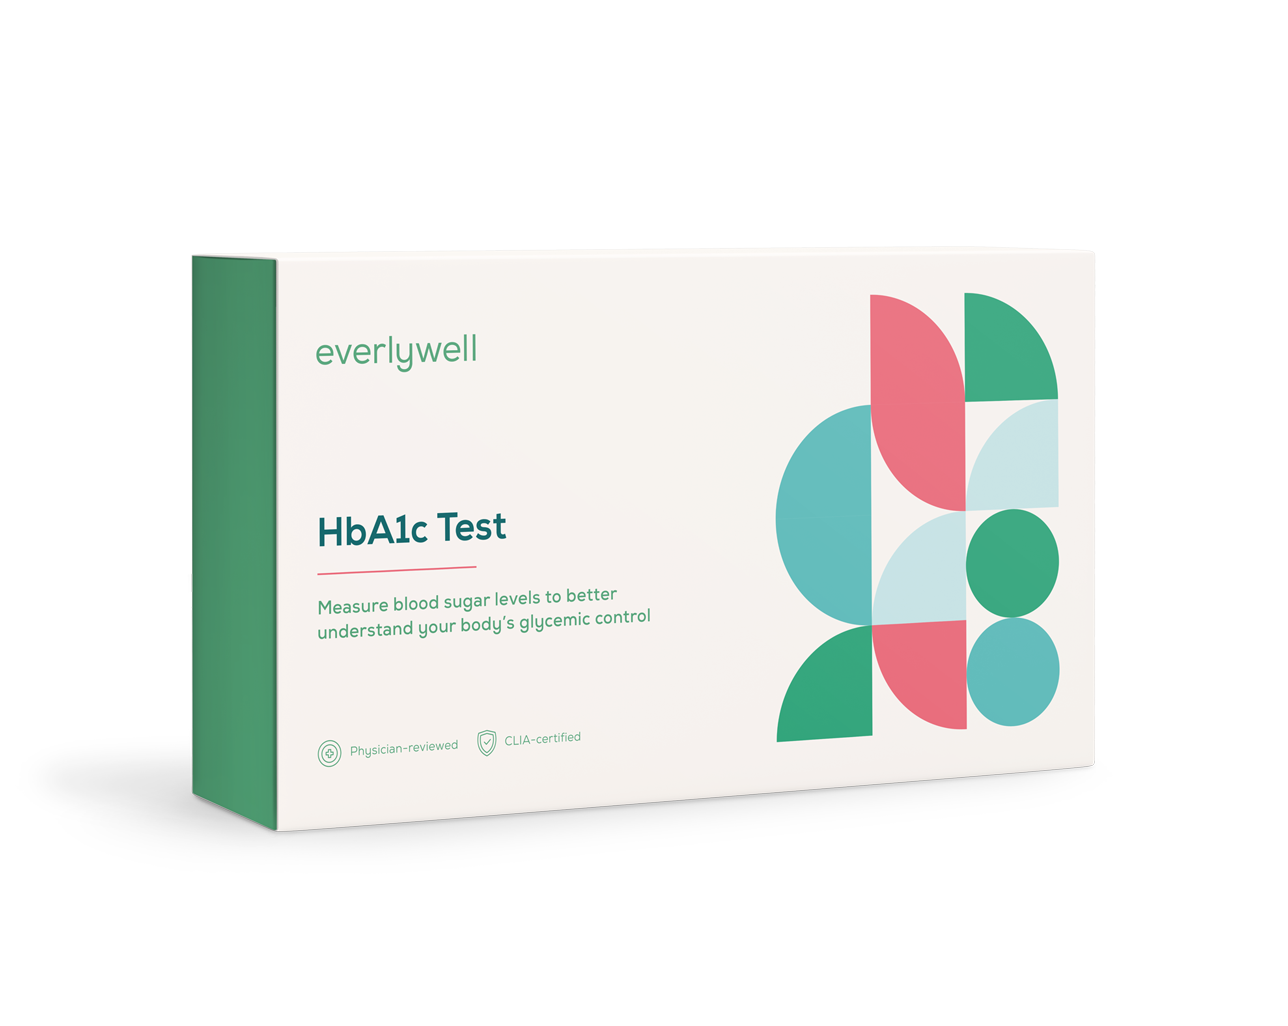 At-home HbA1c Test